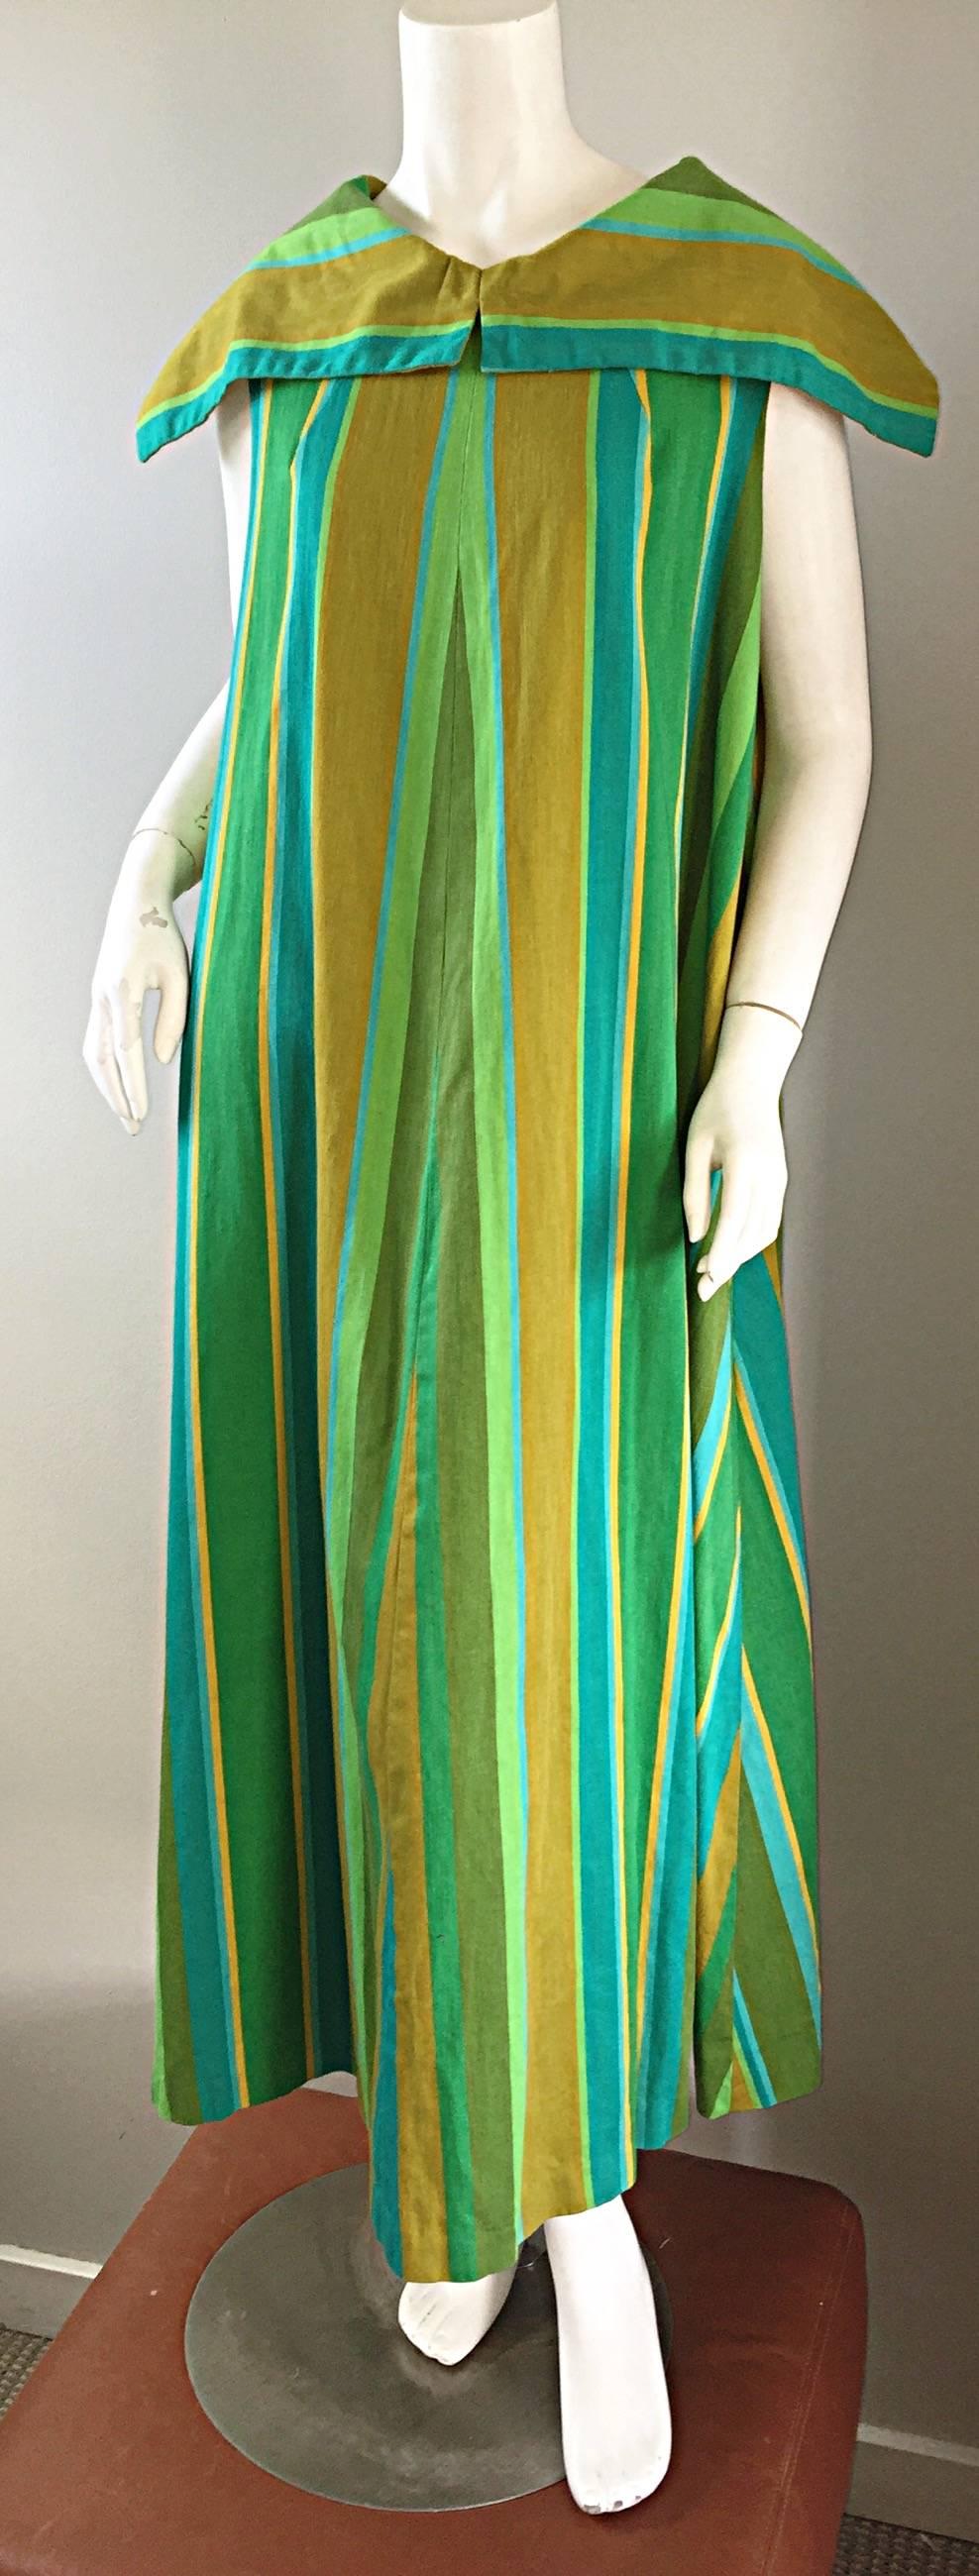 Awesome vintage WHIMS OF CALIFORNIA for JOSEPH MAGNIN blue, teal and green asymmetrical striped caftan / kaftan maxi dress! Heavy duty cotton that holds shape perfectly! Amazing trapeze tent fit looks great on any shape or size! Chic oversized